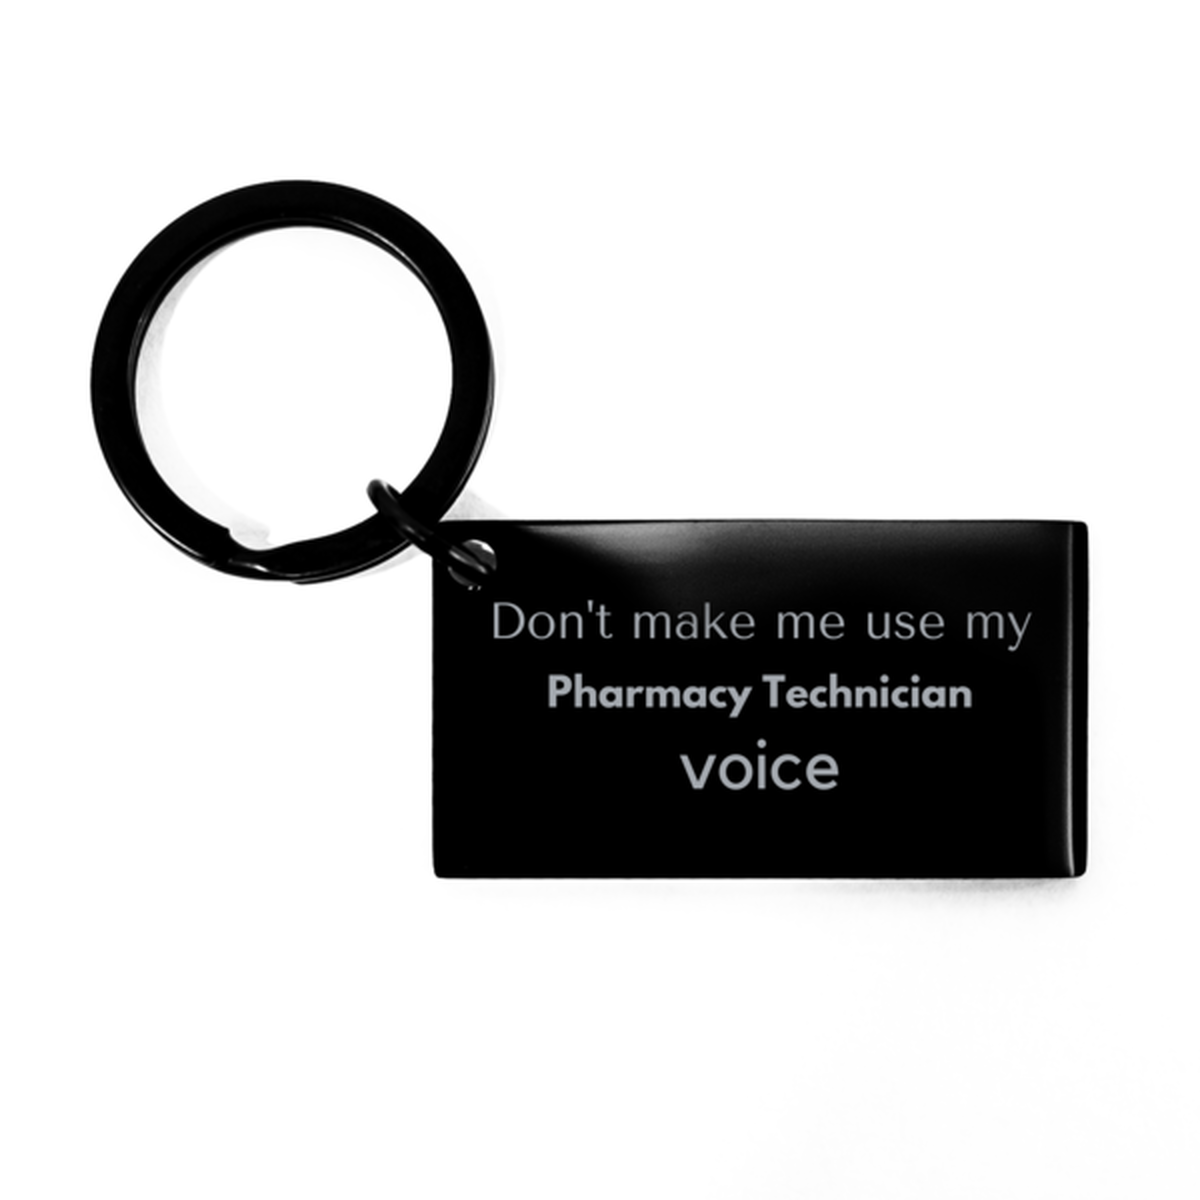 Don't make me use my Pharmacy Technician voice, Sarcasm Pharmacy Technician Gifts, Christmas Pharmacy Technician Keychain Birthday Unique Gifts For Pharmacy Technician Coworkers, Men, Women, Colleague, Friends